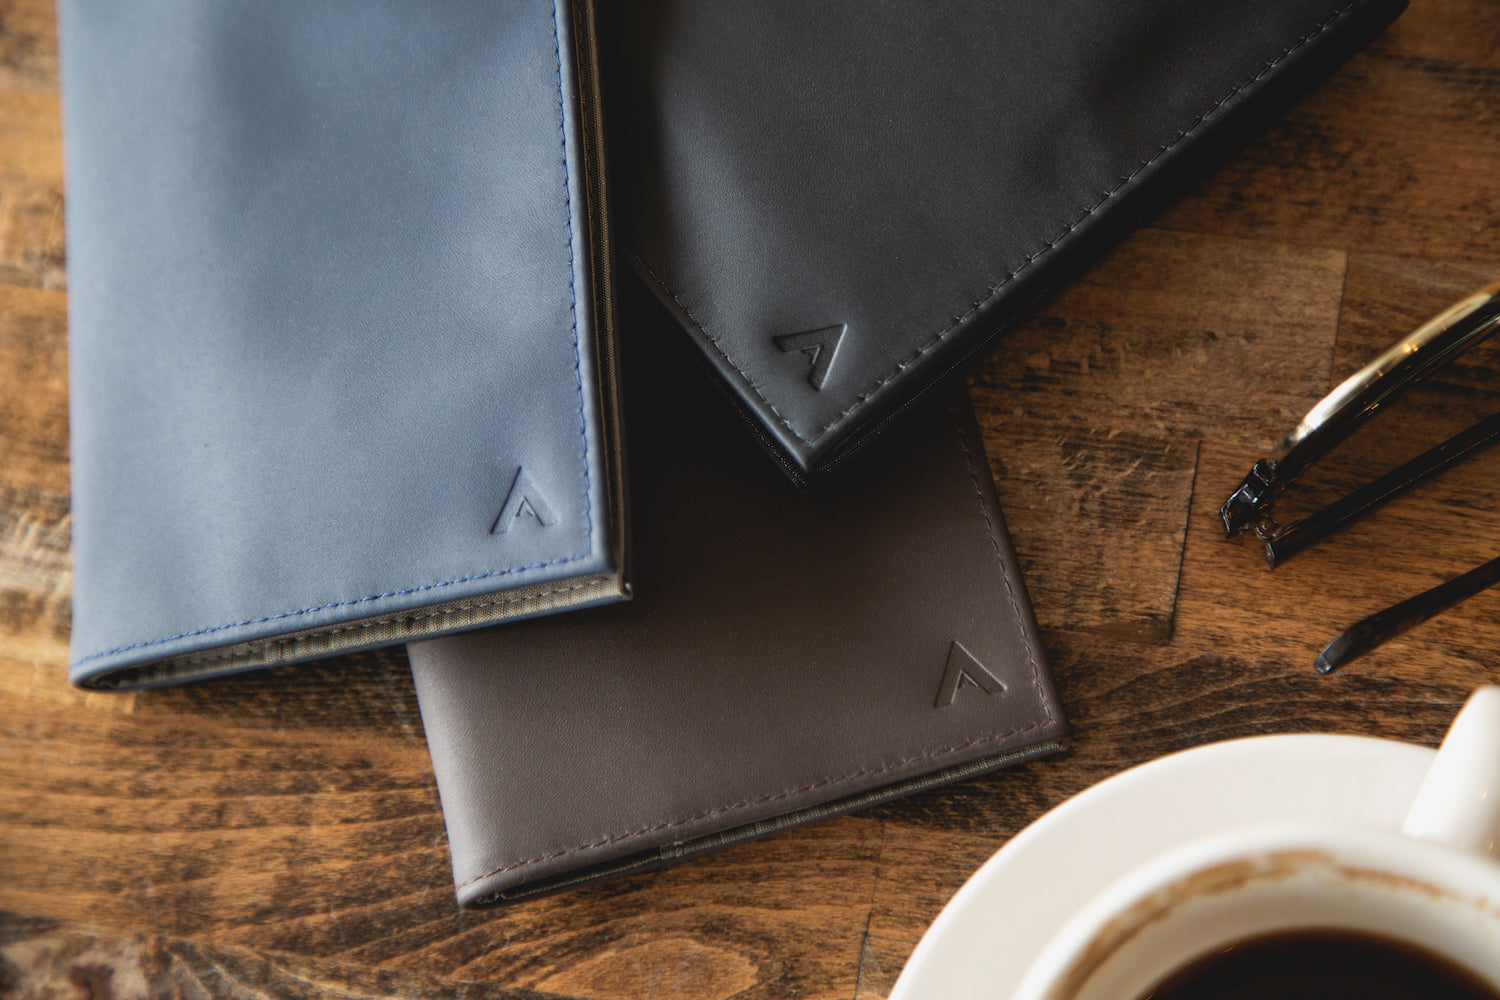 Allett Leather Original Wallets in all colors on a table with coffee - Merlot, Midnight Blue, Onyx Black